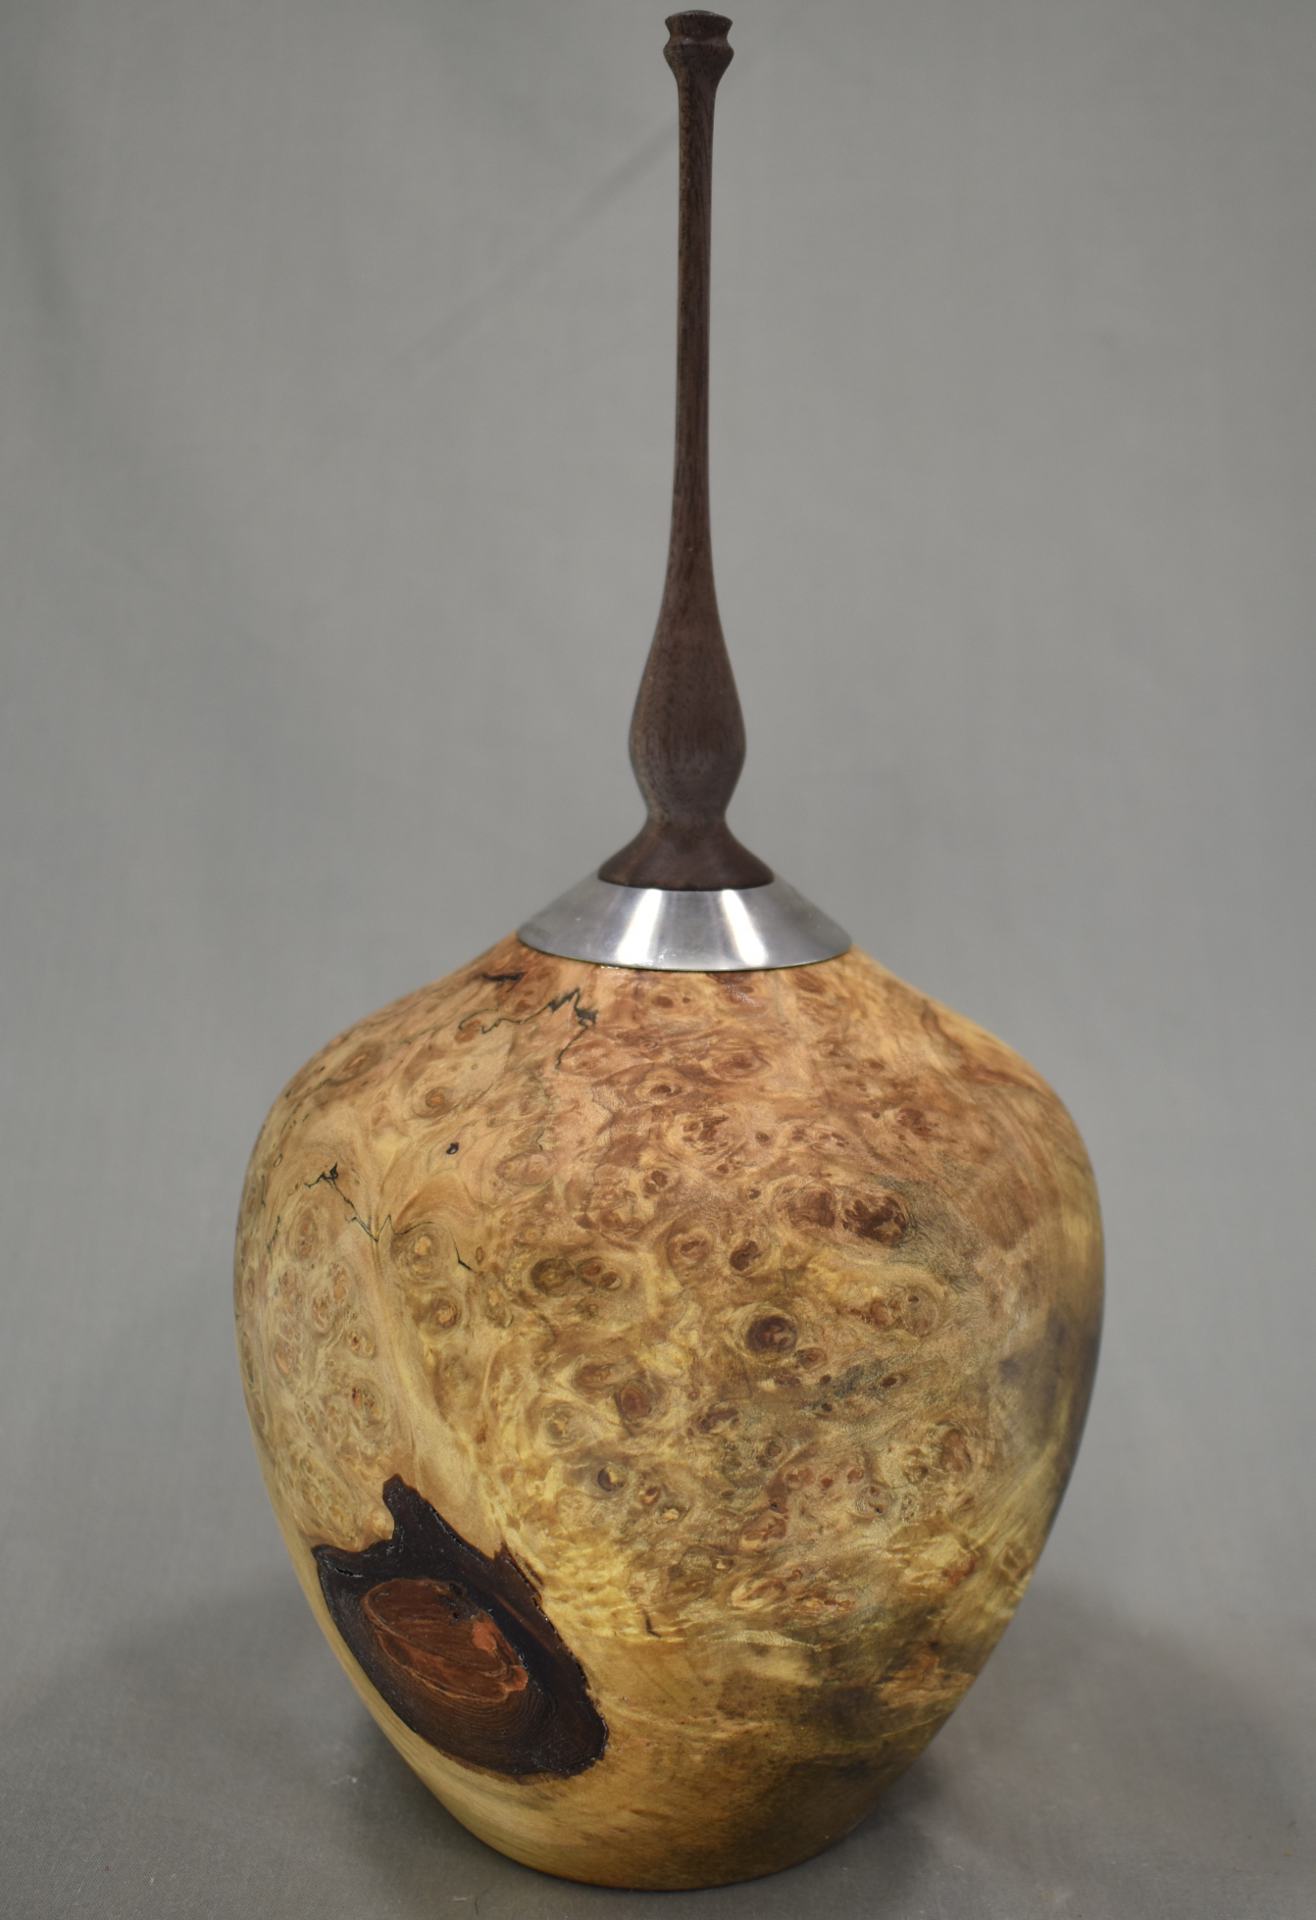 maple burl with pewter threaded finial